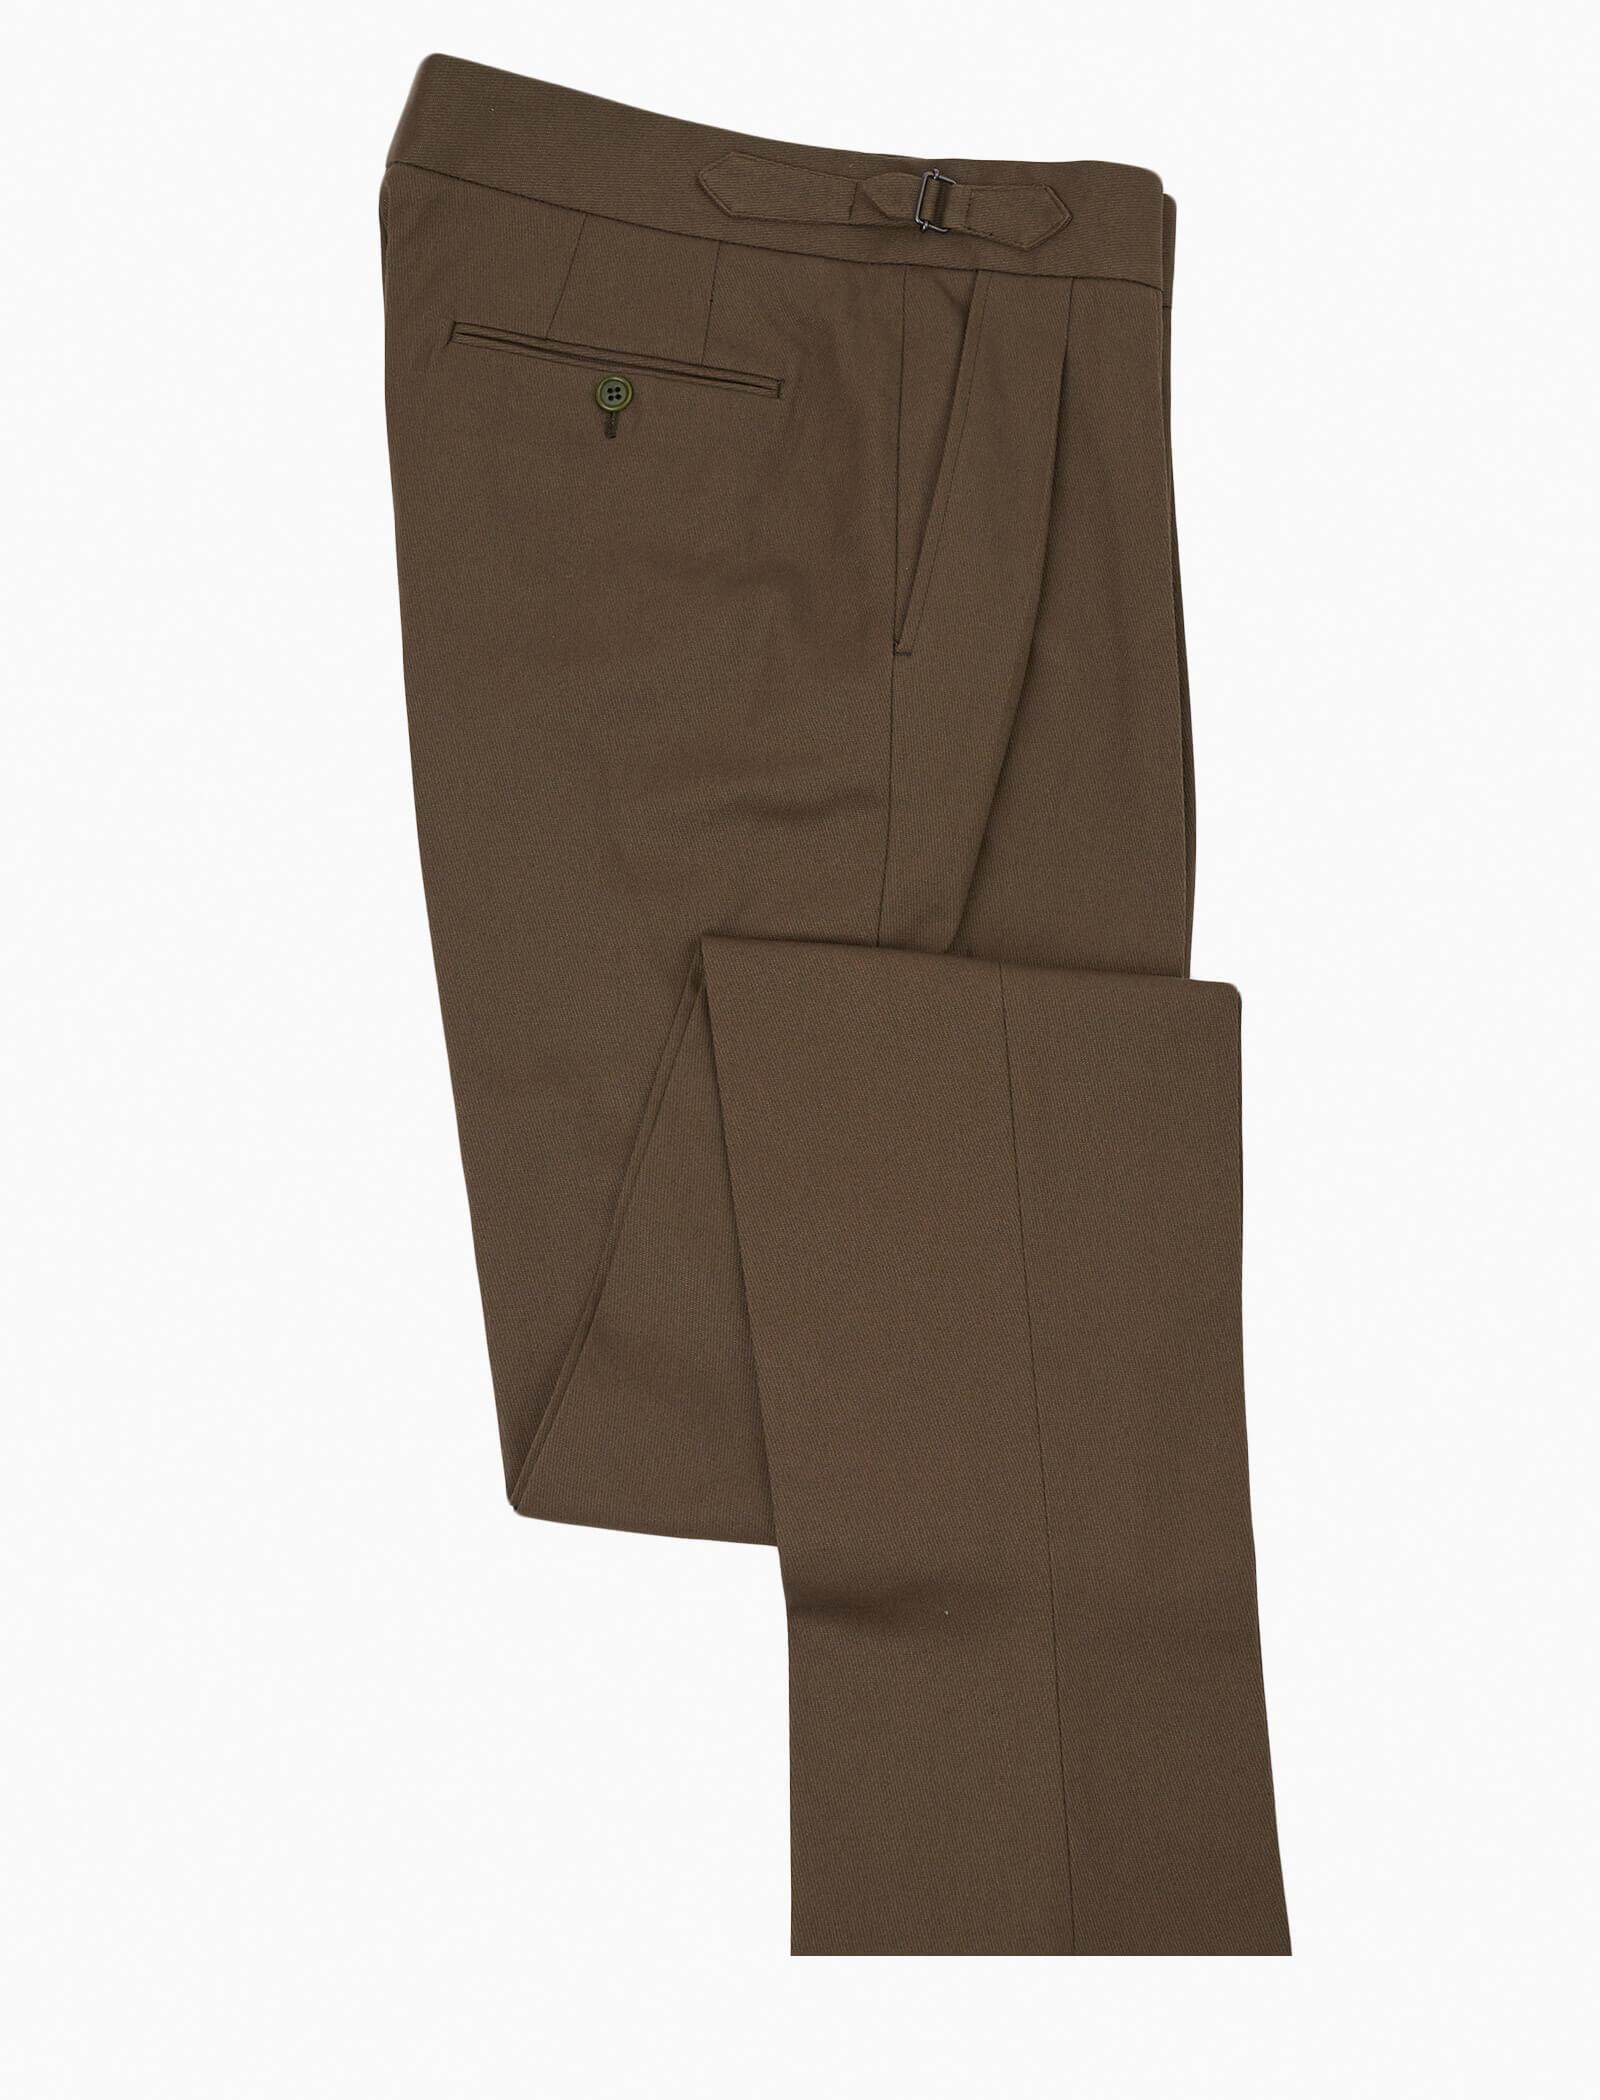 Dark Olive Green Cavalry Twill Cotton High Waisted Trousers | 40 Colori